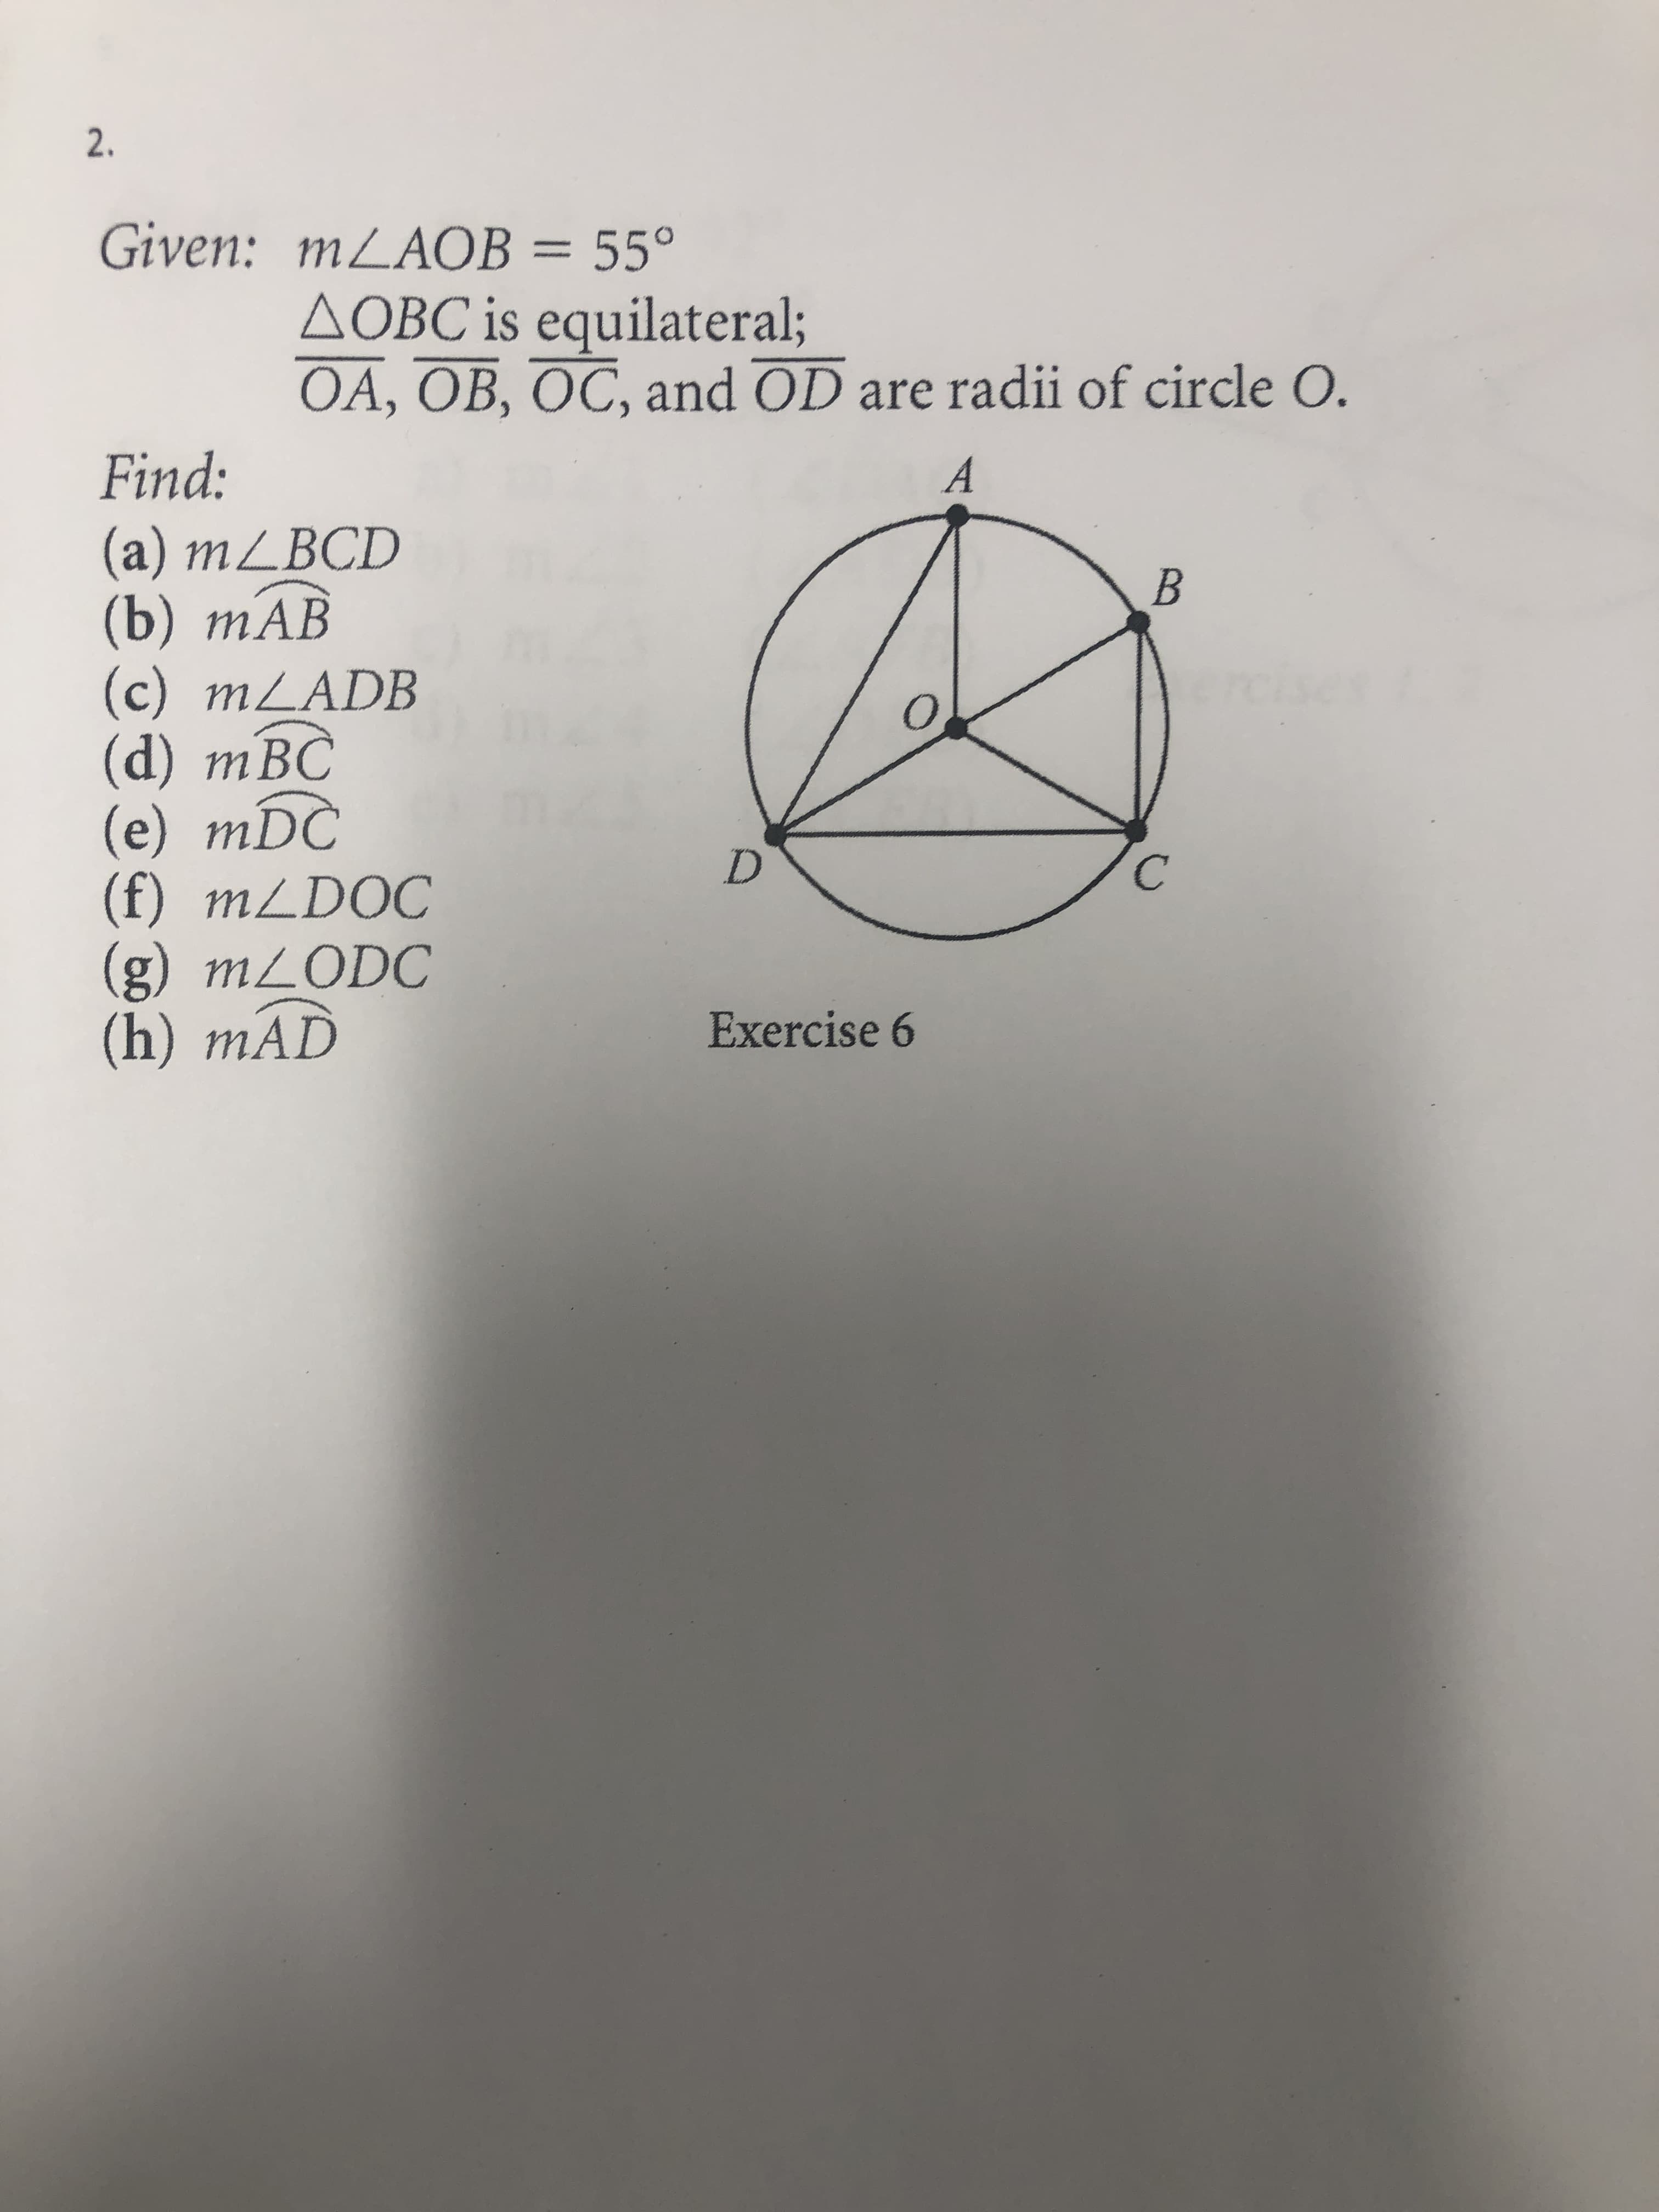 Given: MLAOB = 55°
AOBC is equilateral;
OA, OB, OC, and OD are radii of circle O.
